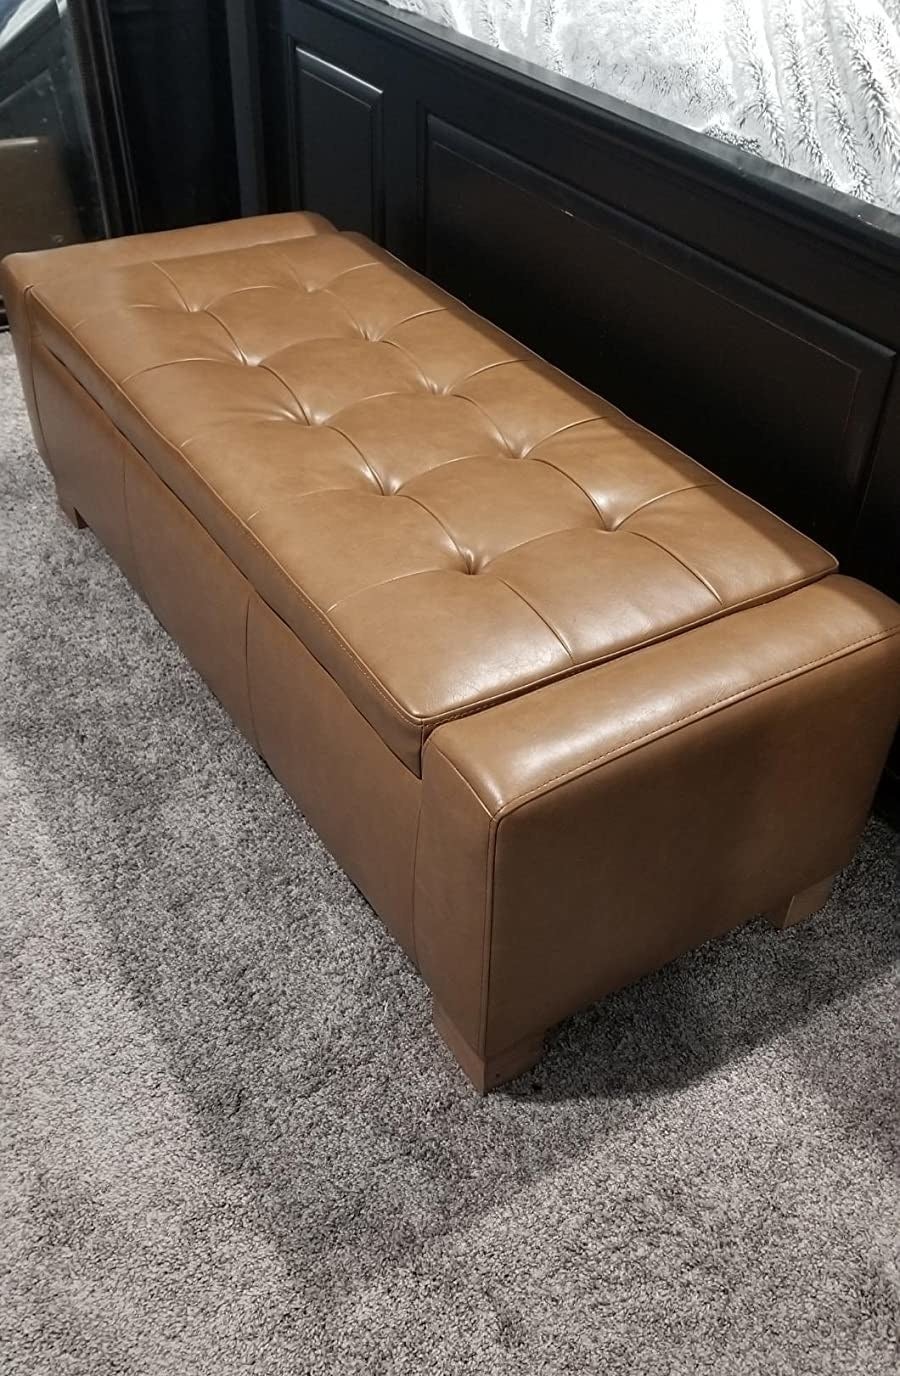 reviewer image of the retro brown leather chita storage bench in a bedroom